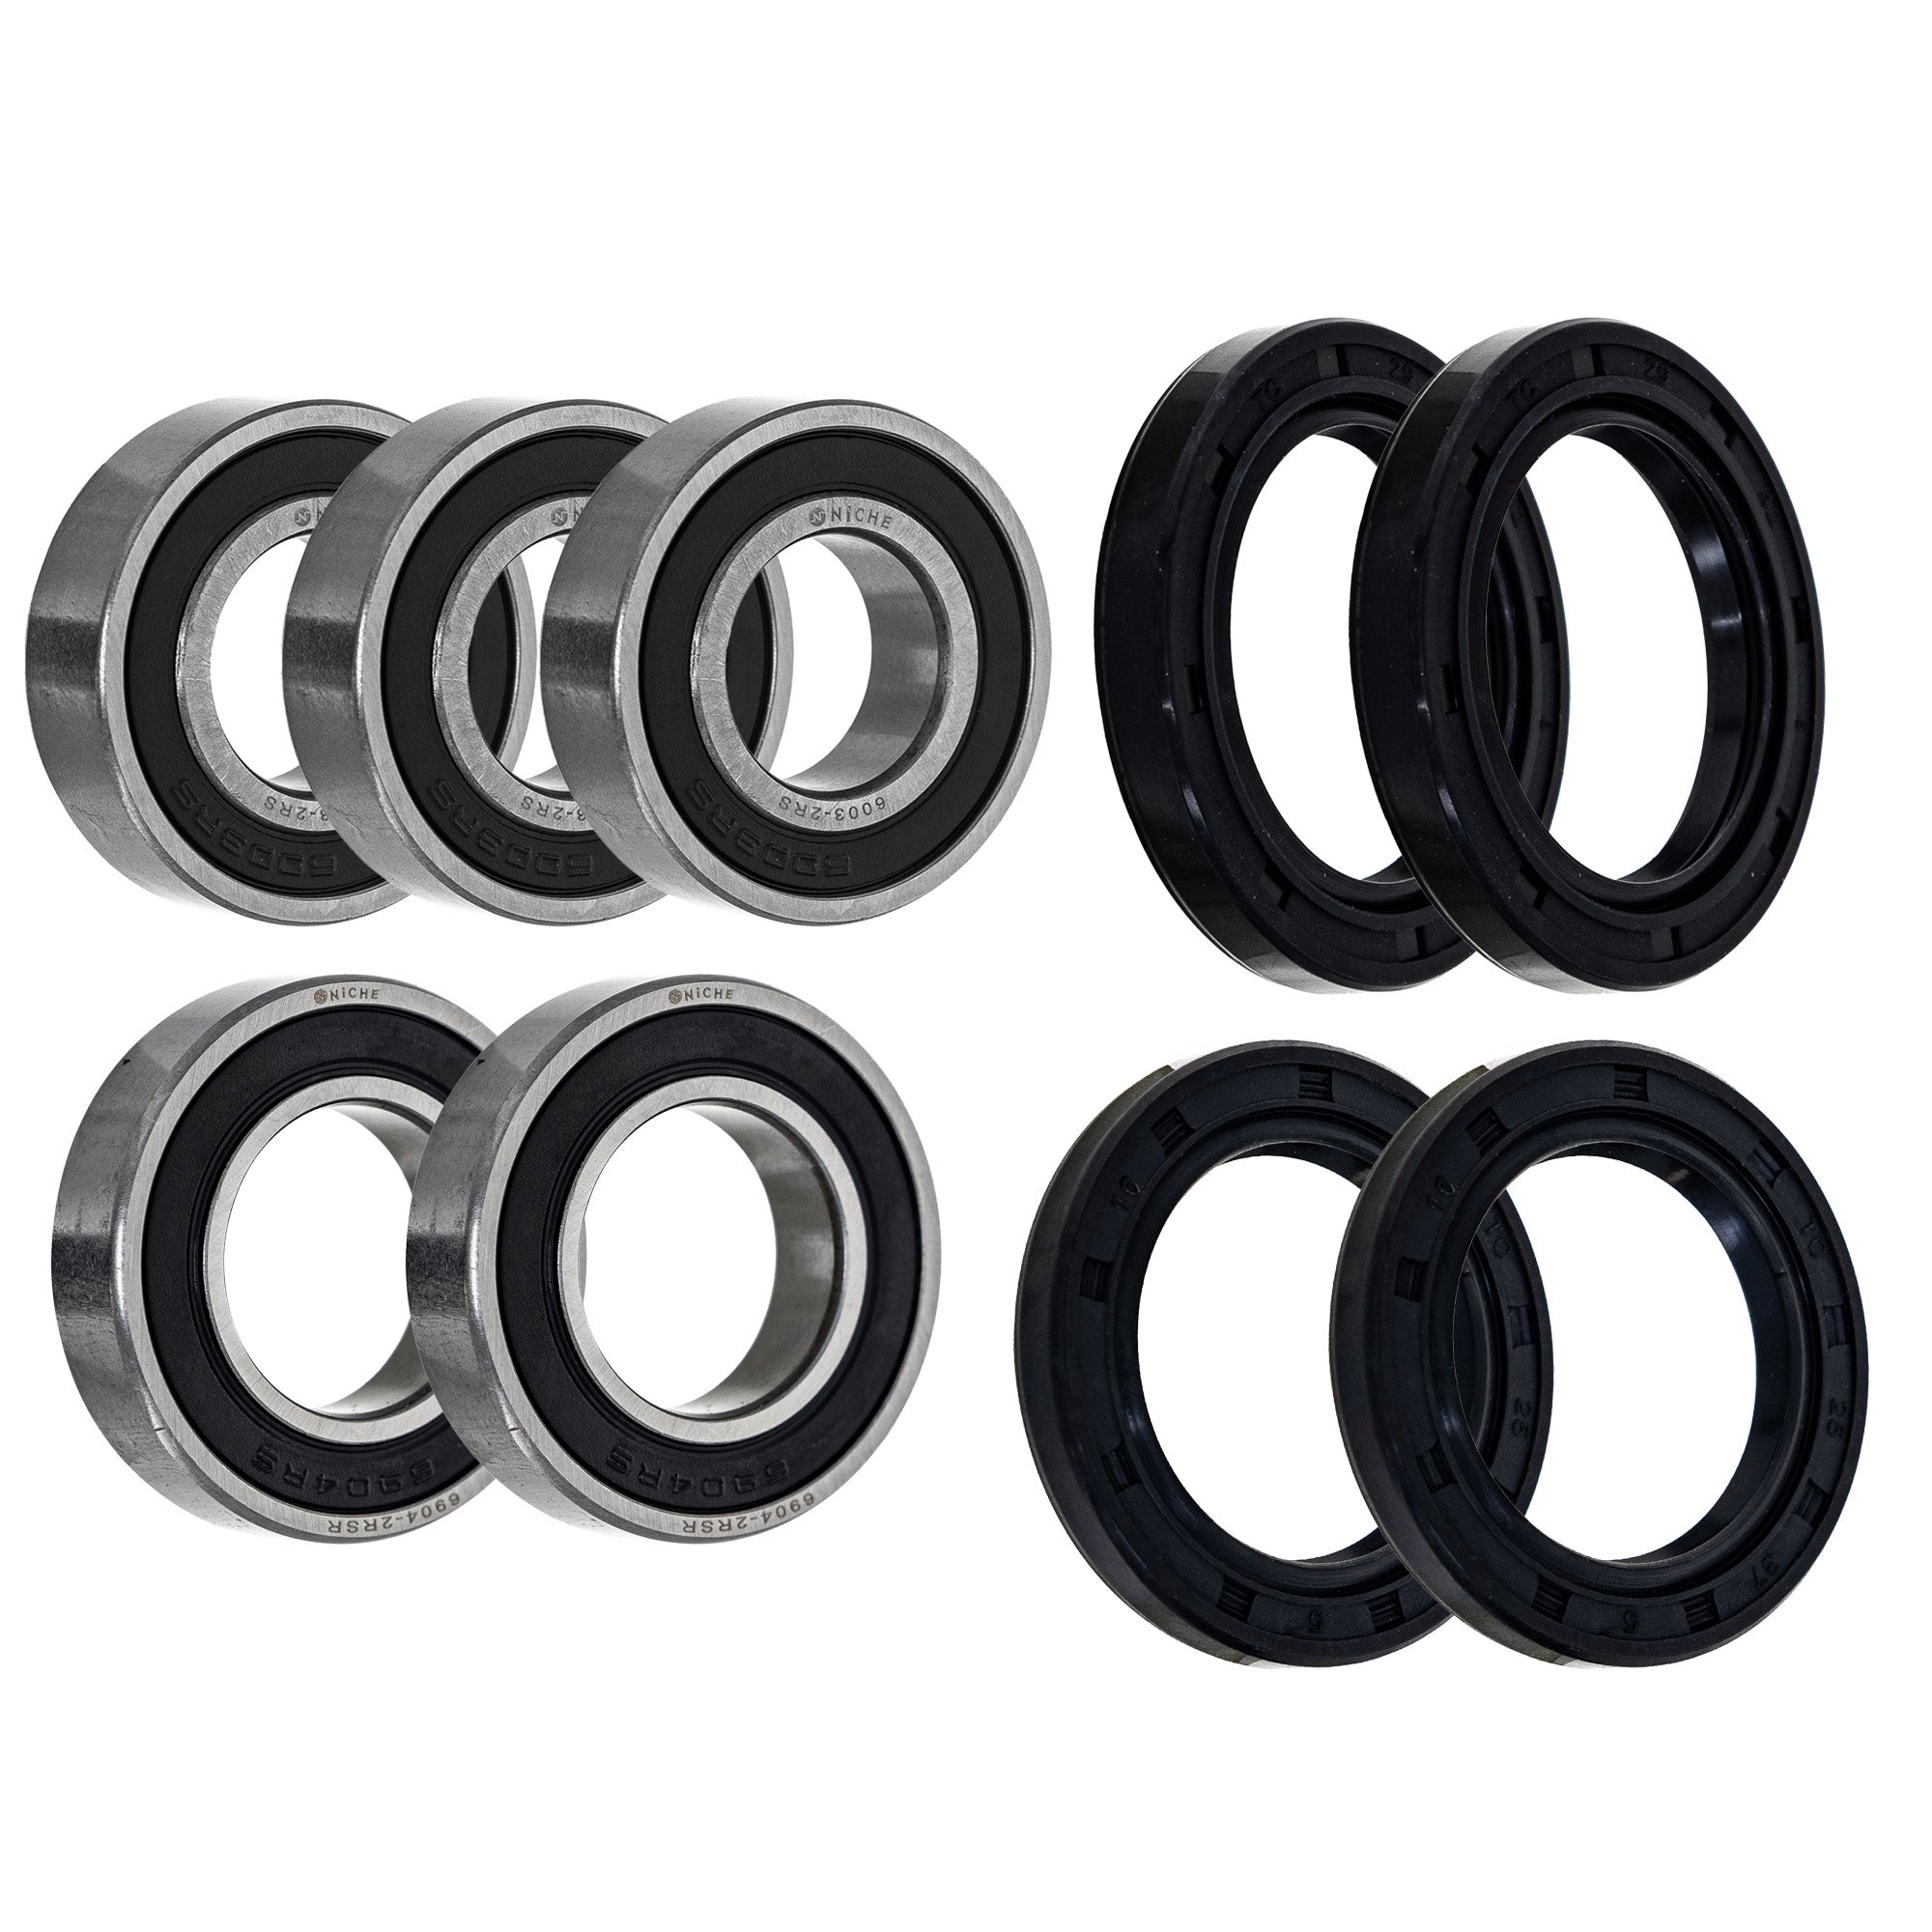 Wheel Bearing Seal Kit for zOTHER Ref No RM250 RM125 NICHE MK1008743